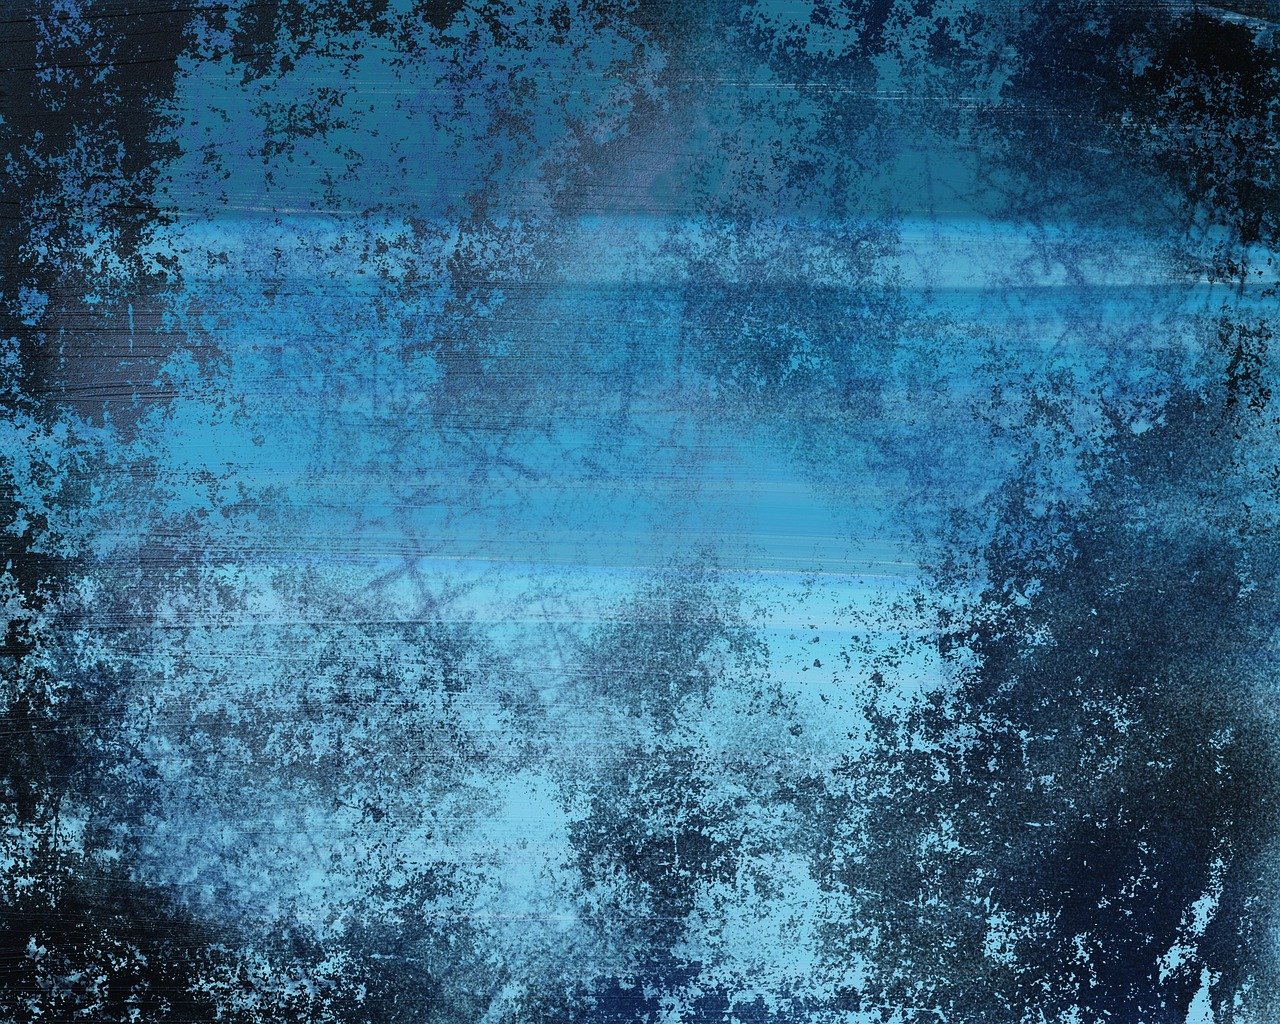 a man riding a snowboard down a snow covered slope, a picture, inspired by Richter, shutterstock, conceptual art, abstract design. parallax. blue, worn decay texture, branches composition abstract, stock photo